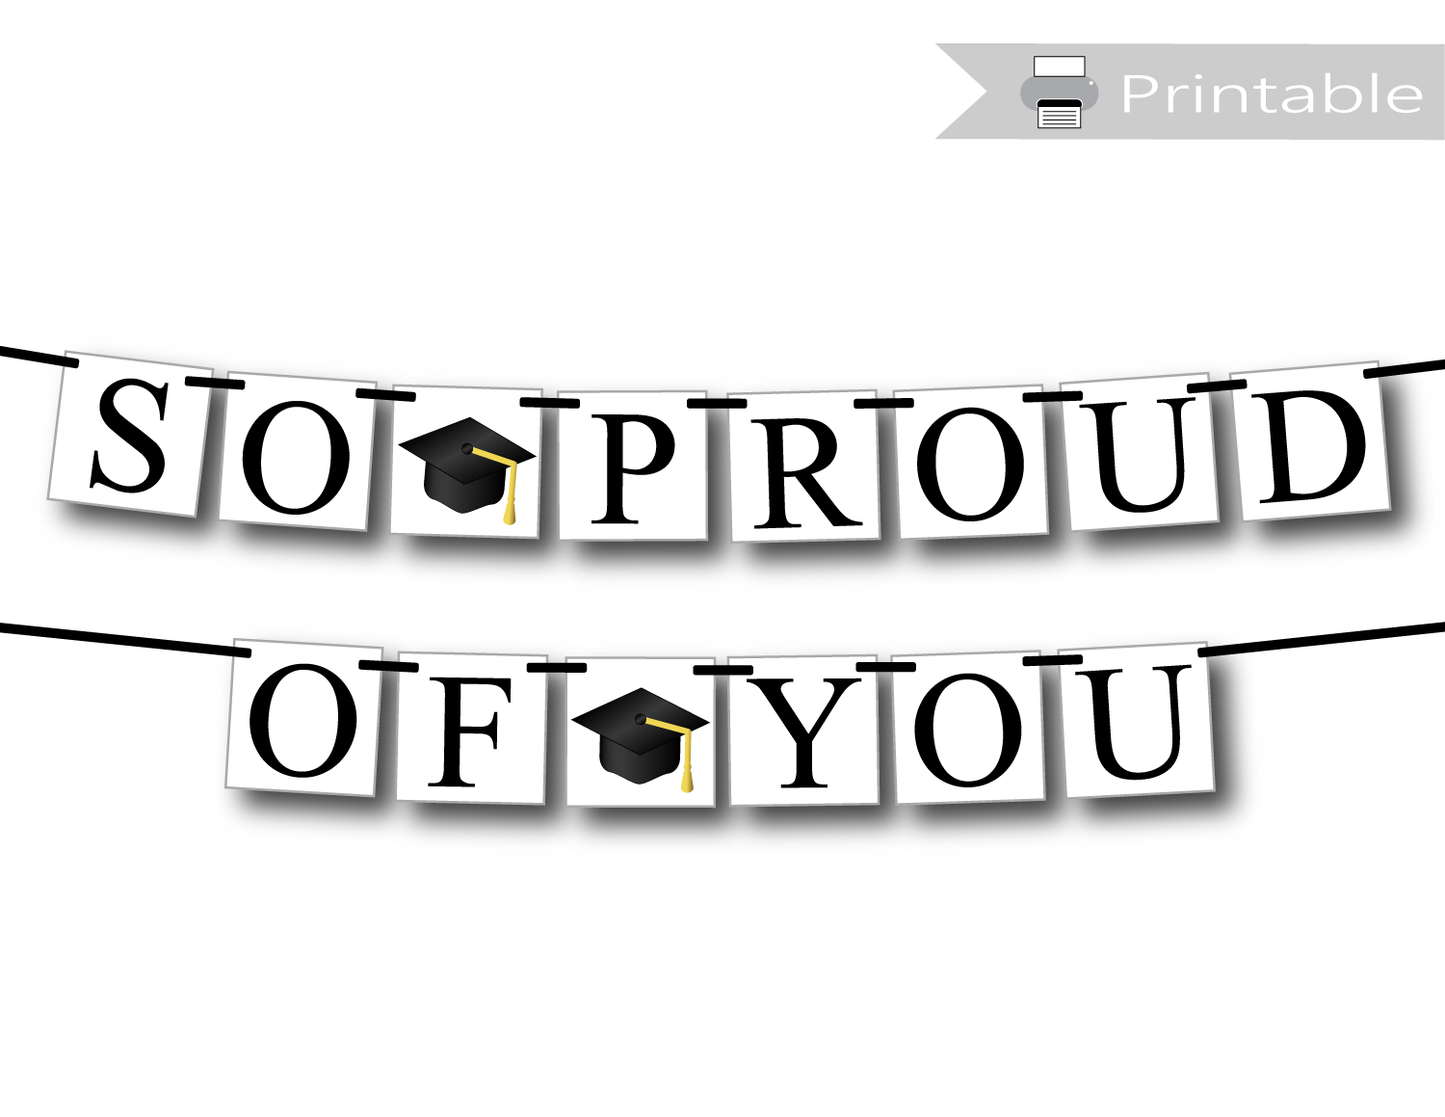 so proud of you banner - diy graduation party decoration - Celebrating Together